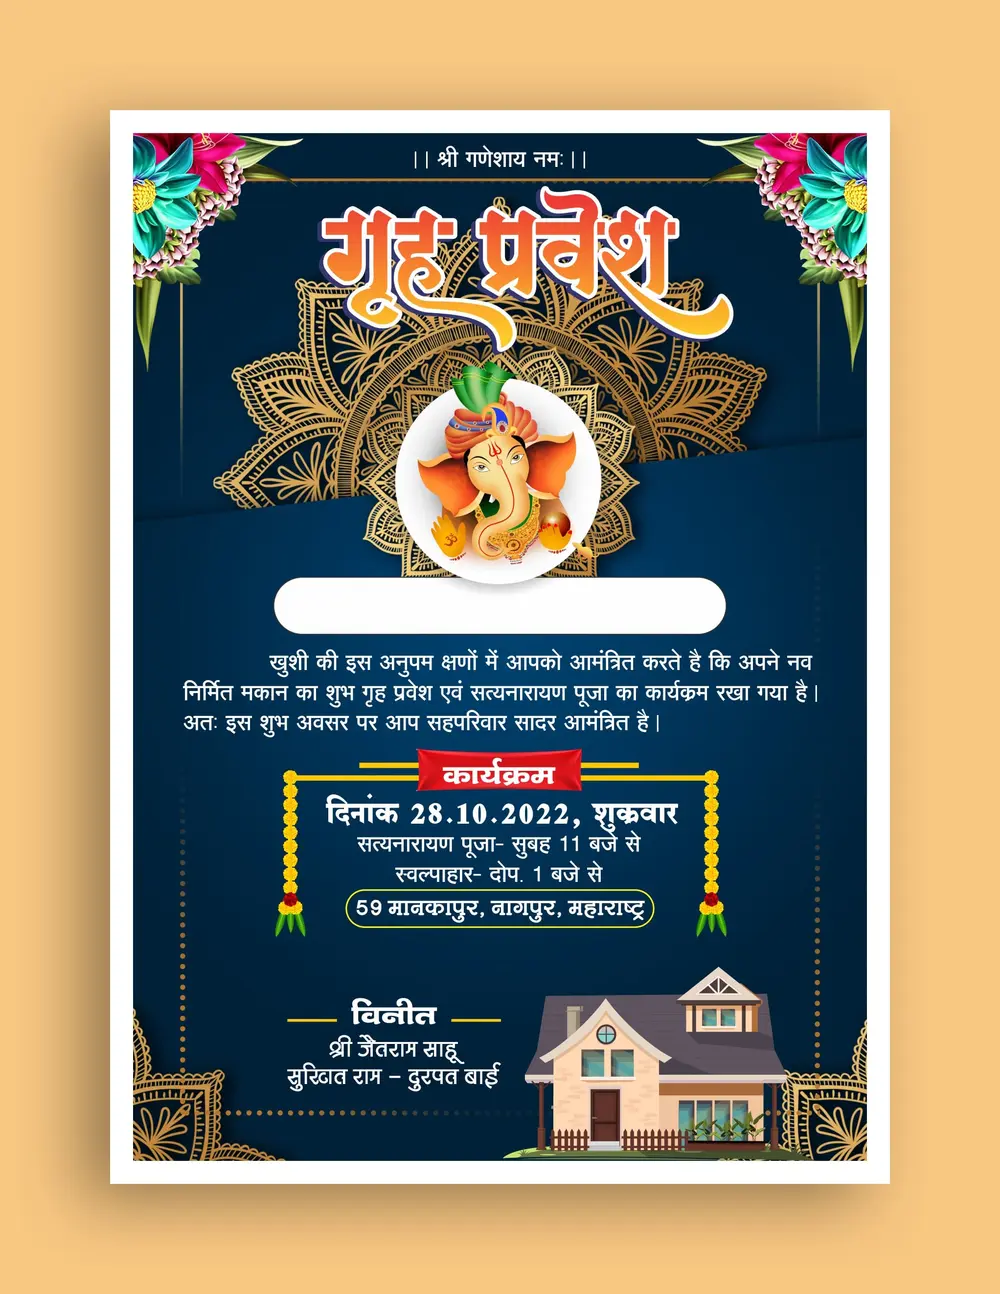 FHD_Griha pravesh invitation card in hindi cdr and psd file download_151022-min